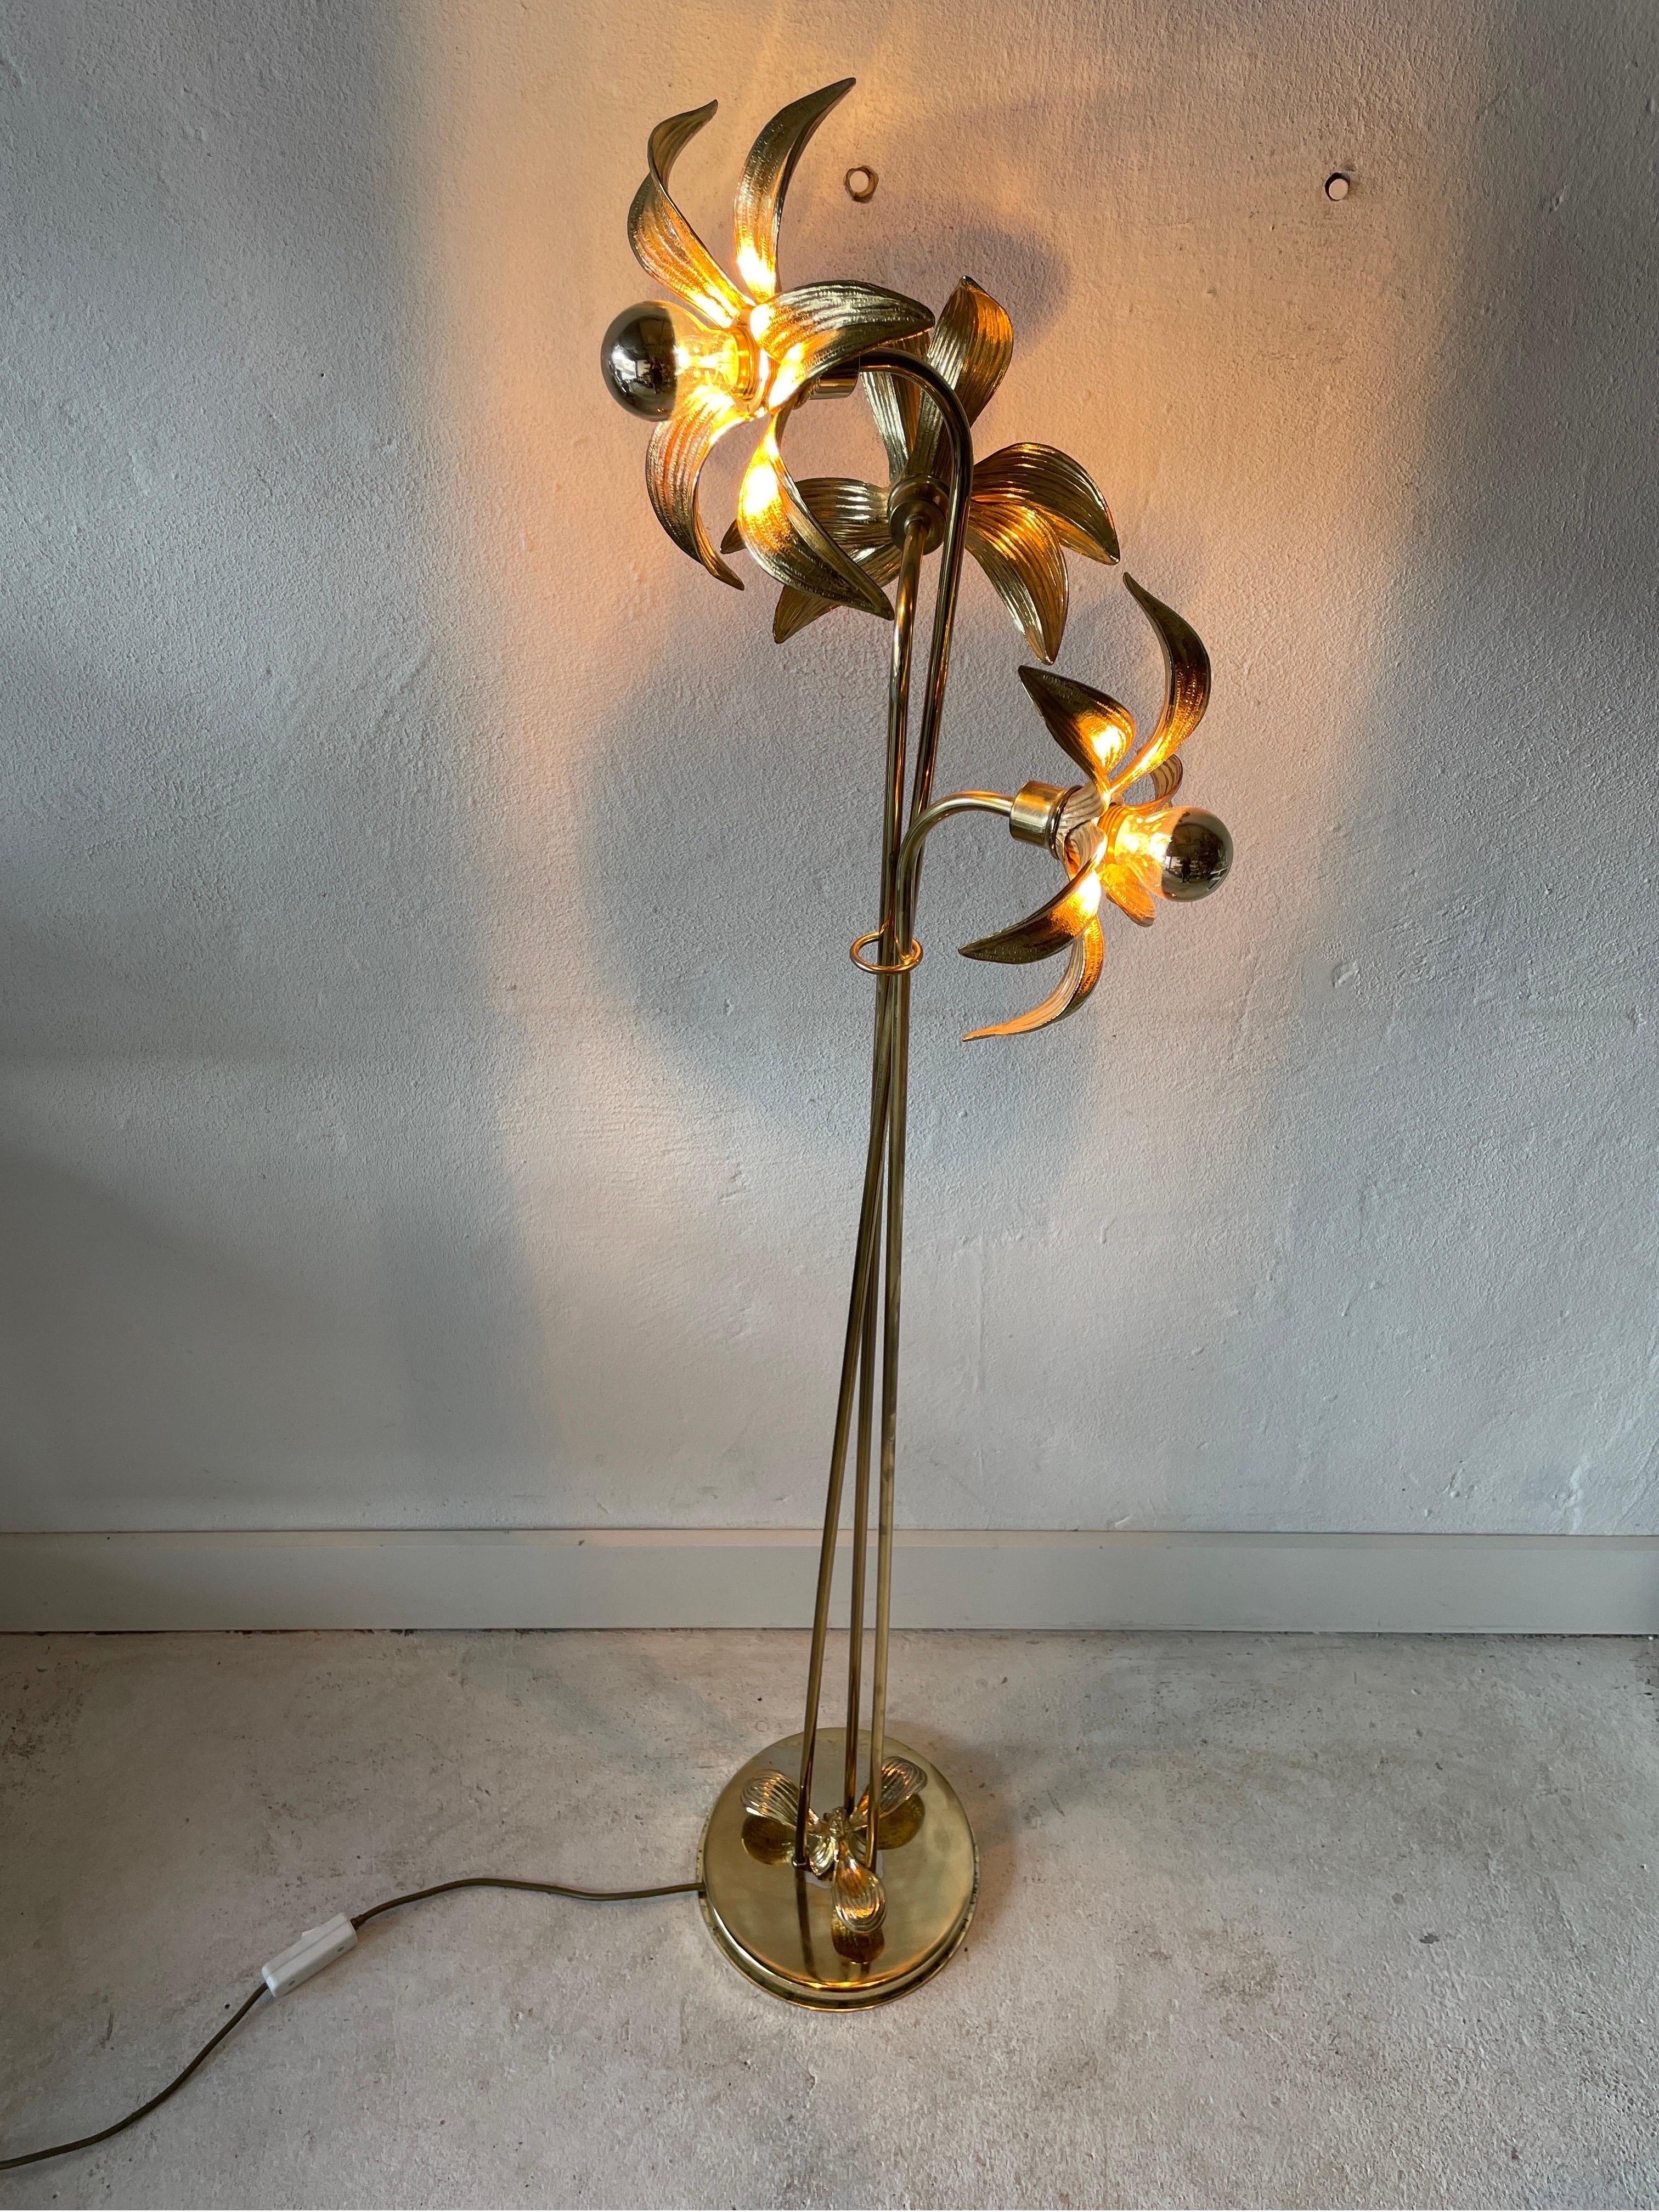 Triple Flower Shade Brass Floor Lamp by Willy Daro for Massive, 1970s, Germany For Sale 4